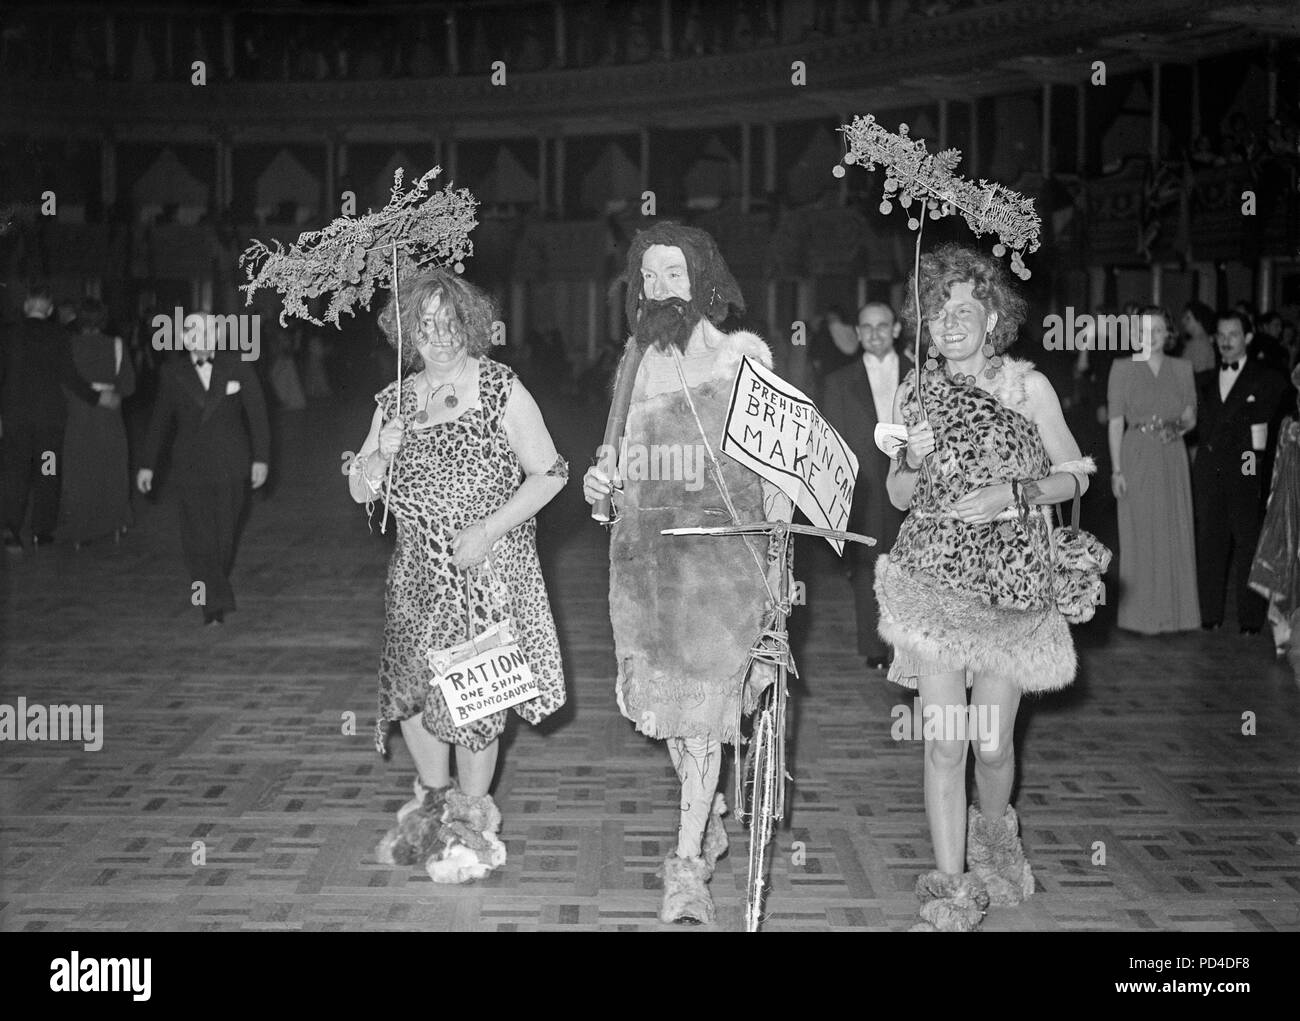 28th September 1946. Royal Albert Hall, London, England. A Five Arts Ball. The first full scale fancy dress ball since the end of the Second World War, took place in aid of the Royal Free Hospital. Photo shows 'As Prehistoric Britain Can Make It', a tableau carrying an illusion of the 'Britain Can Make It' campaign of the time. Left to right, Mr. and Mrs. J. W. Fiske, and Mrs. R. P. Crampton. Stock Photo